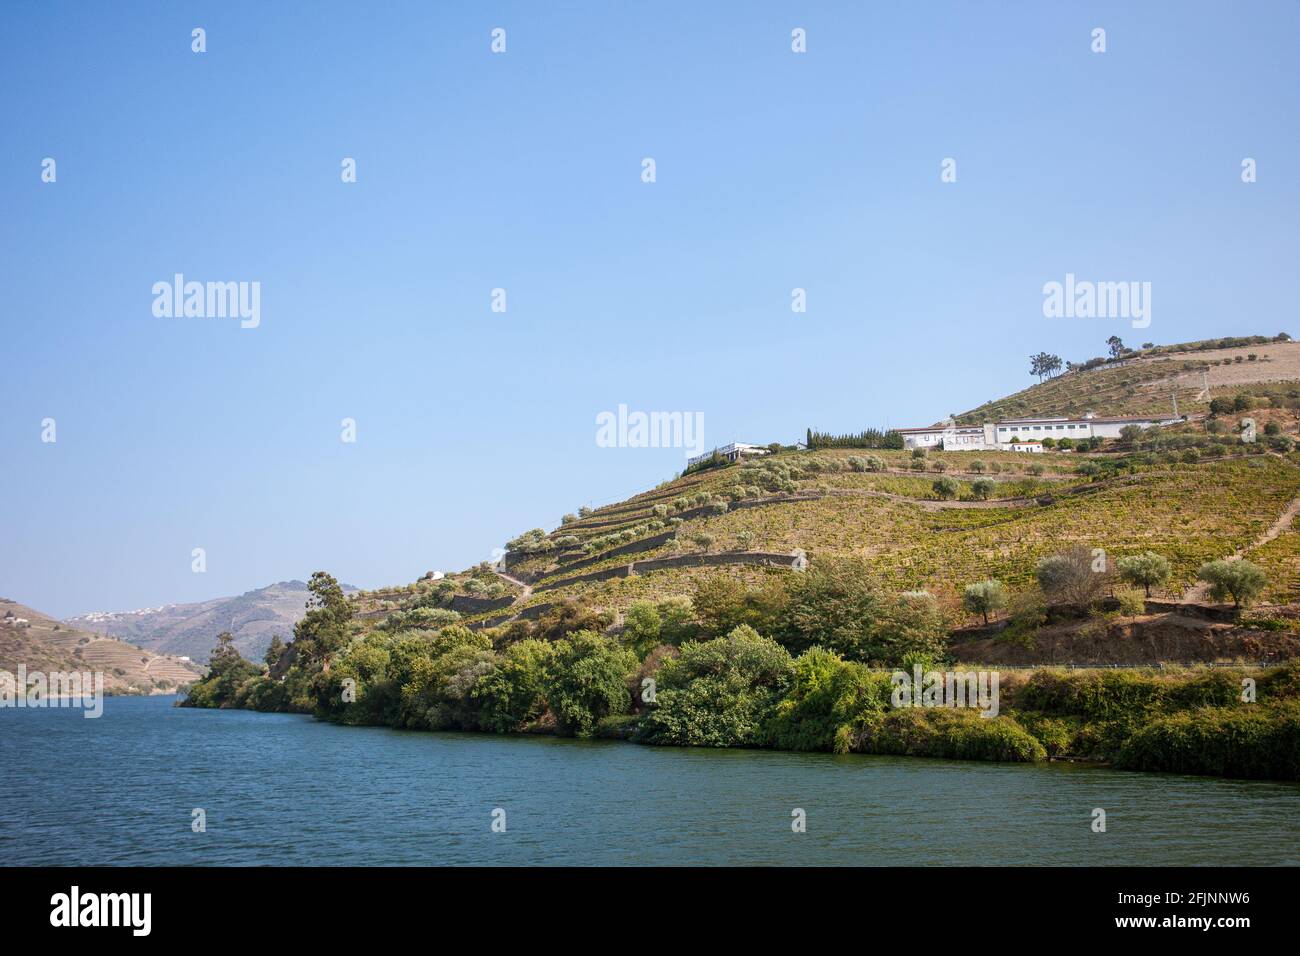 River cruise along the Douro River as it flows through the beautiful Portuguese countryside of the Douro Valley in northern Portugal. Stock Photo